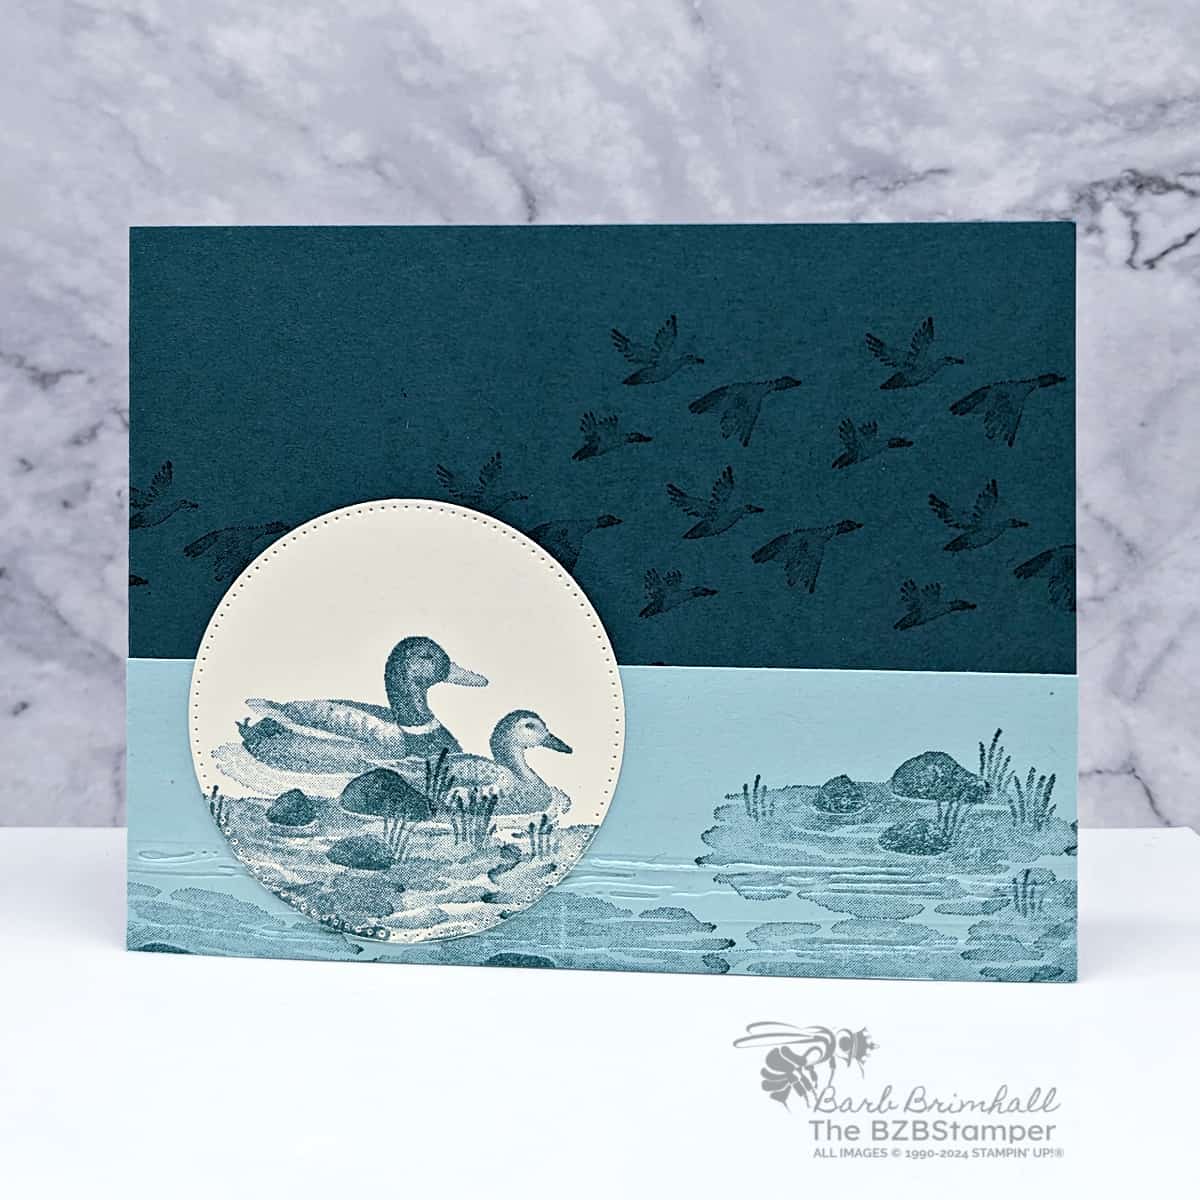 Monocromatic Feathered Flight Stamp Set in blues featuring ducks floating on the water.